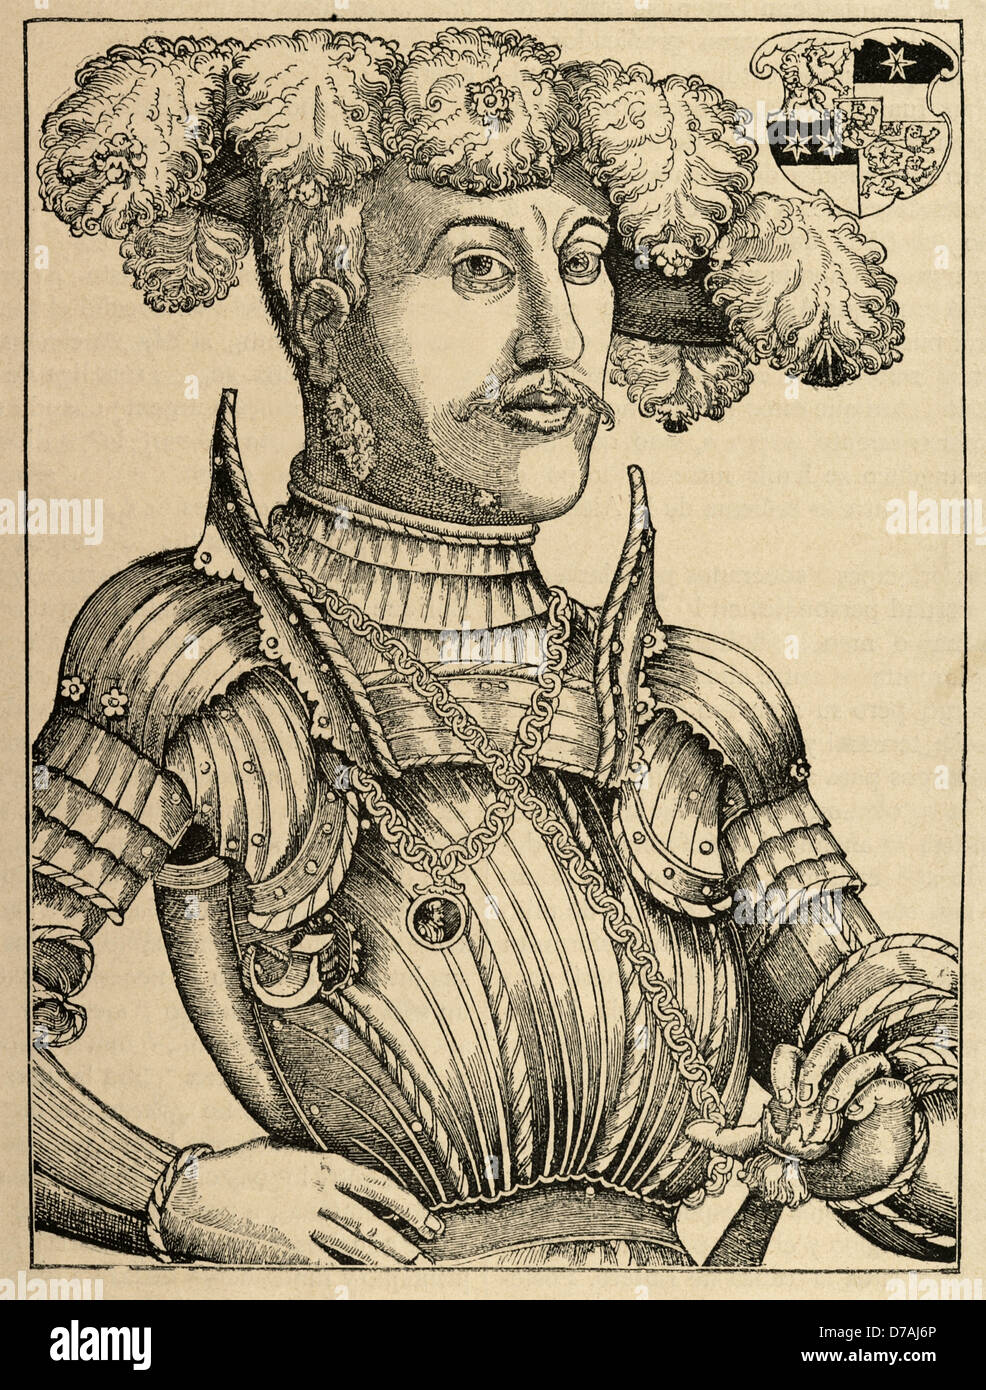 Philip I of Hesse (1504-1567) called The Magnanimous. Woodcut by Hans Brosamer (ca.1500-1554). Stock Photo